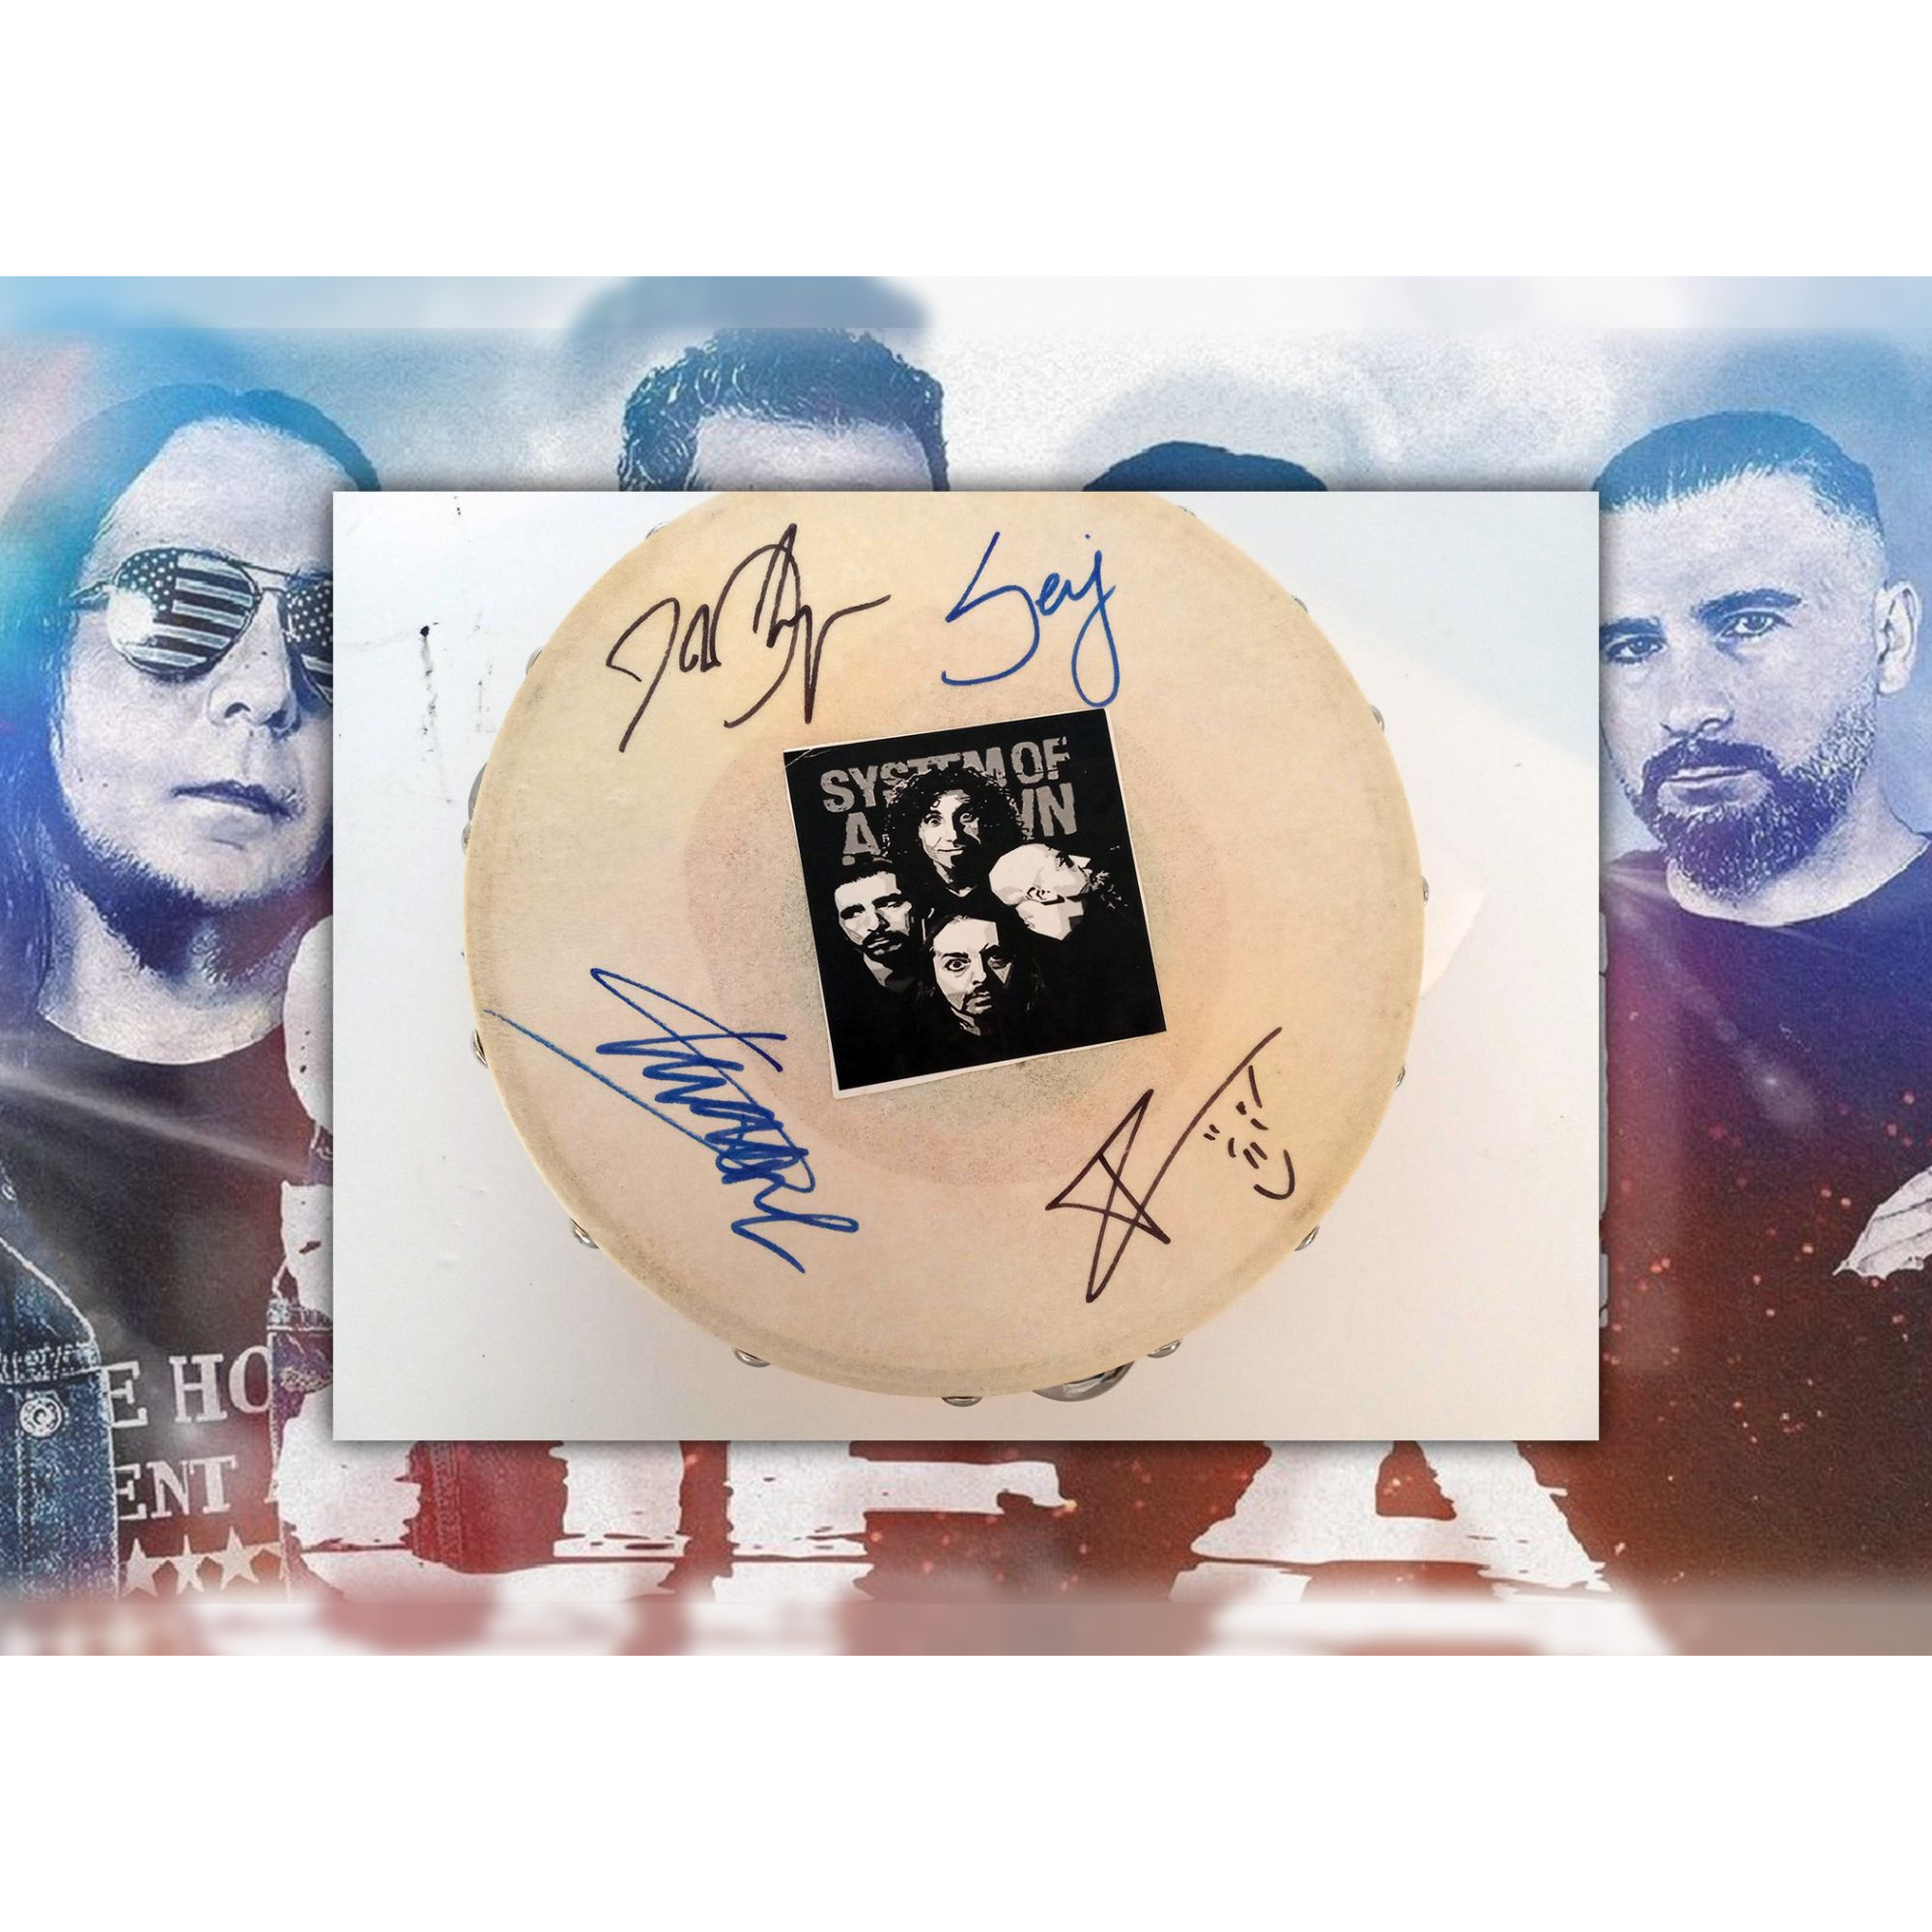 System of a Down 10-in tambourine signed with proof